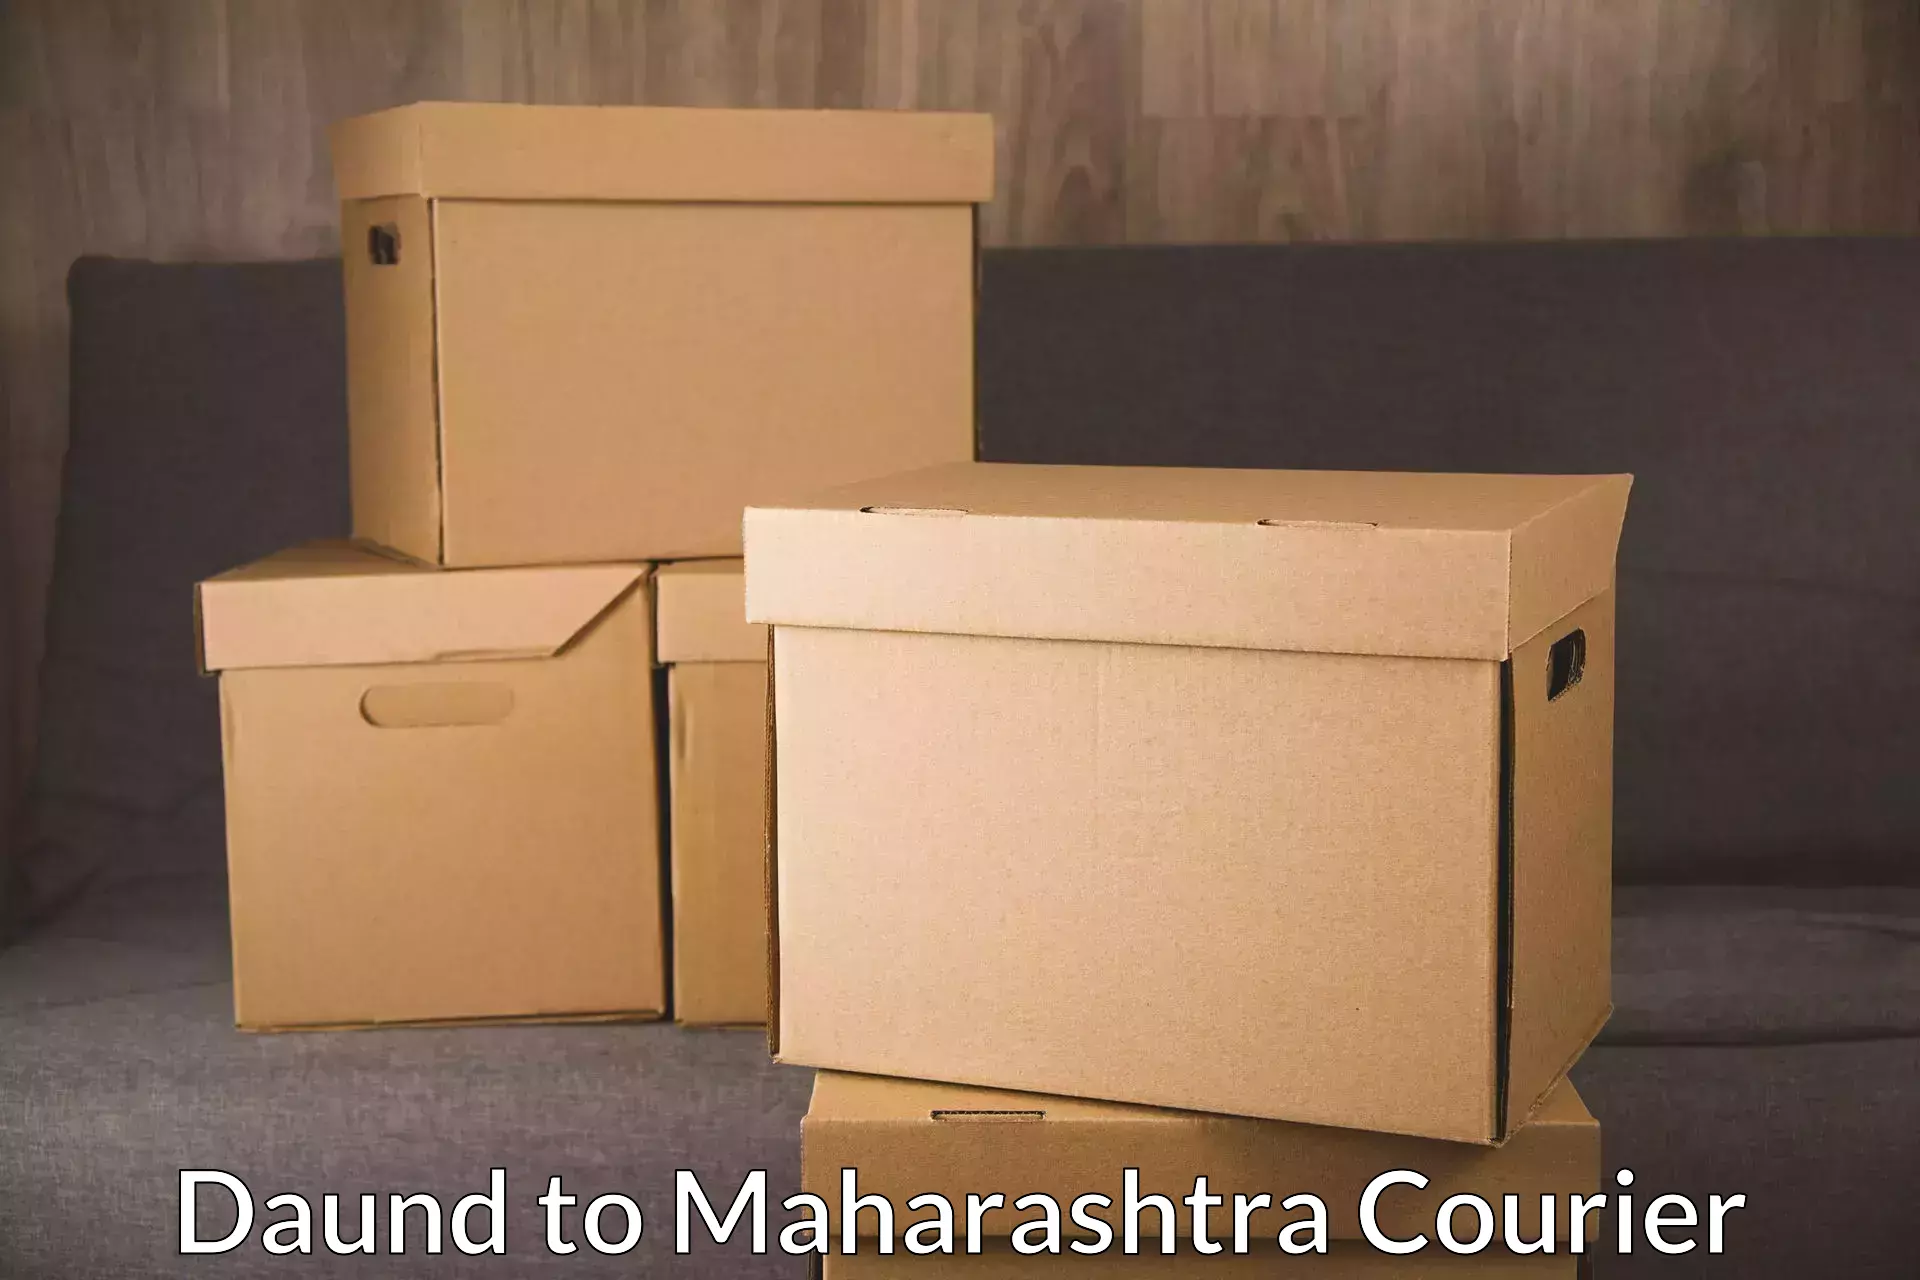 On-call courier service Daund to Ahmednagar